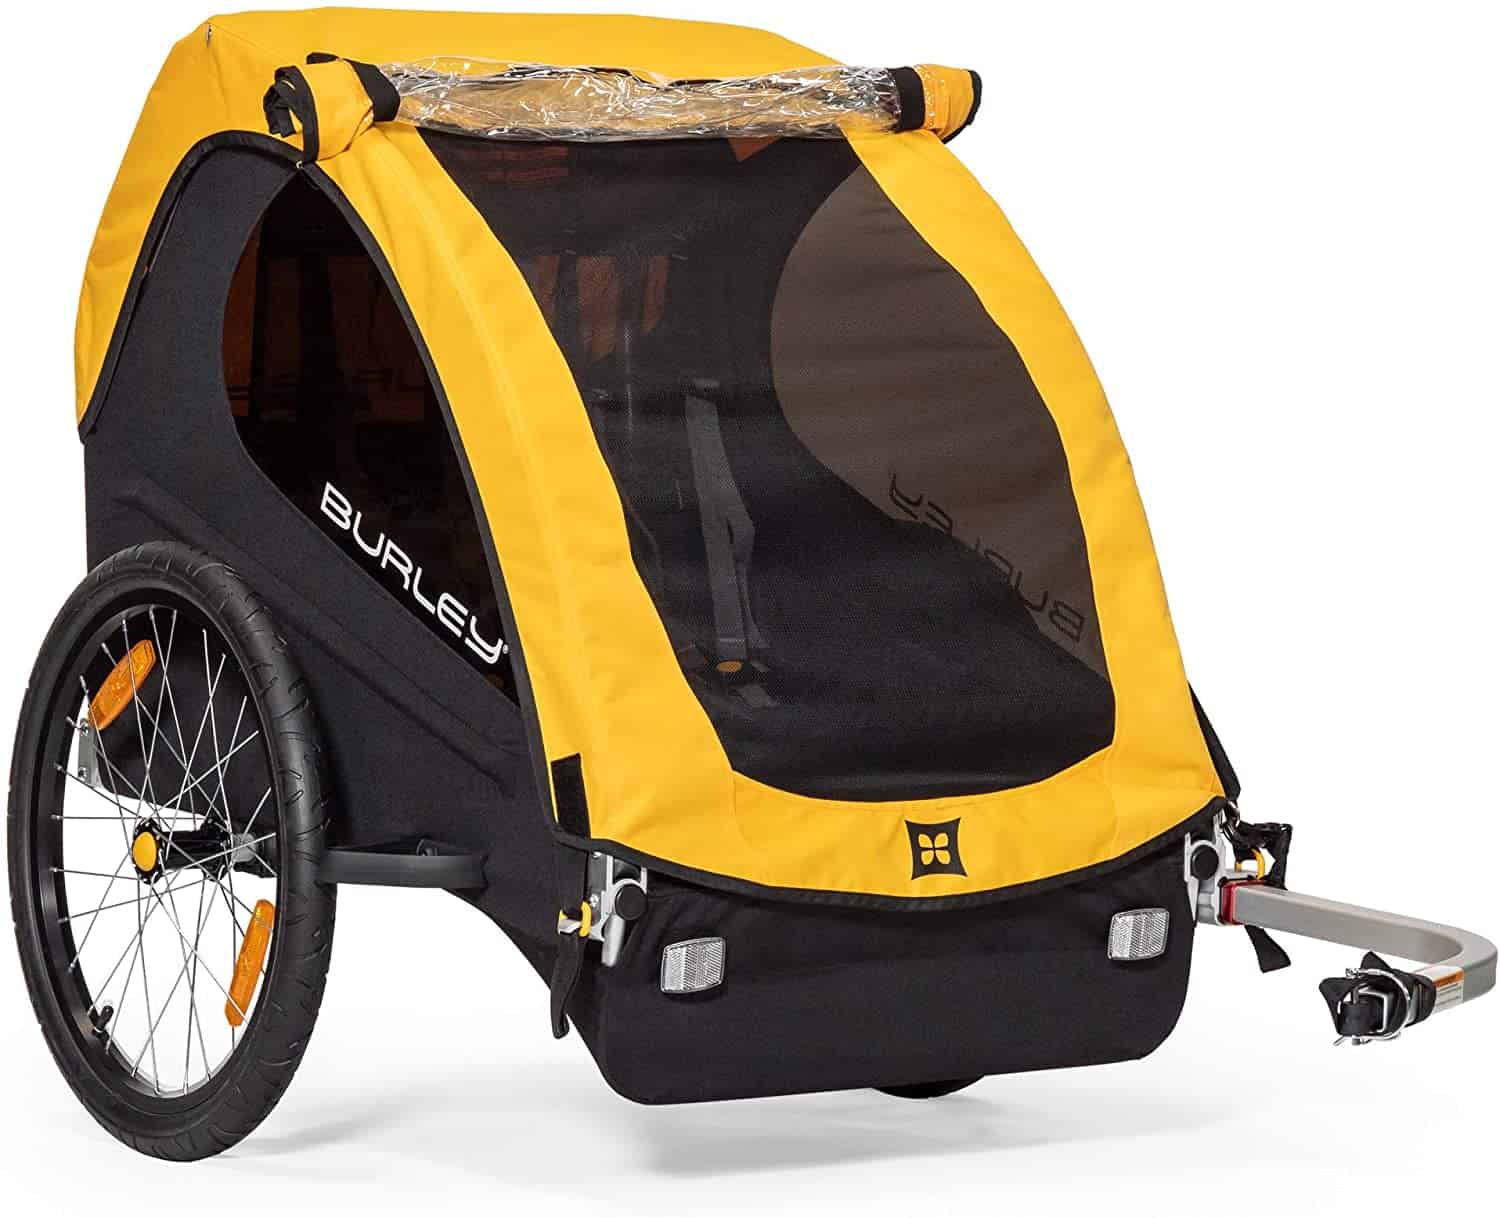 Most convenient bicycle trailer to transport children Burley Bee bicycle trailer